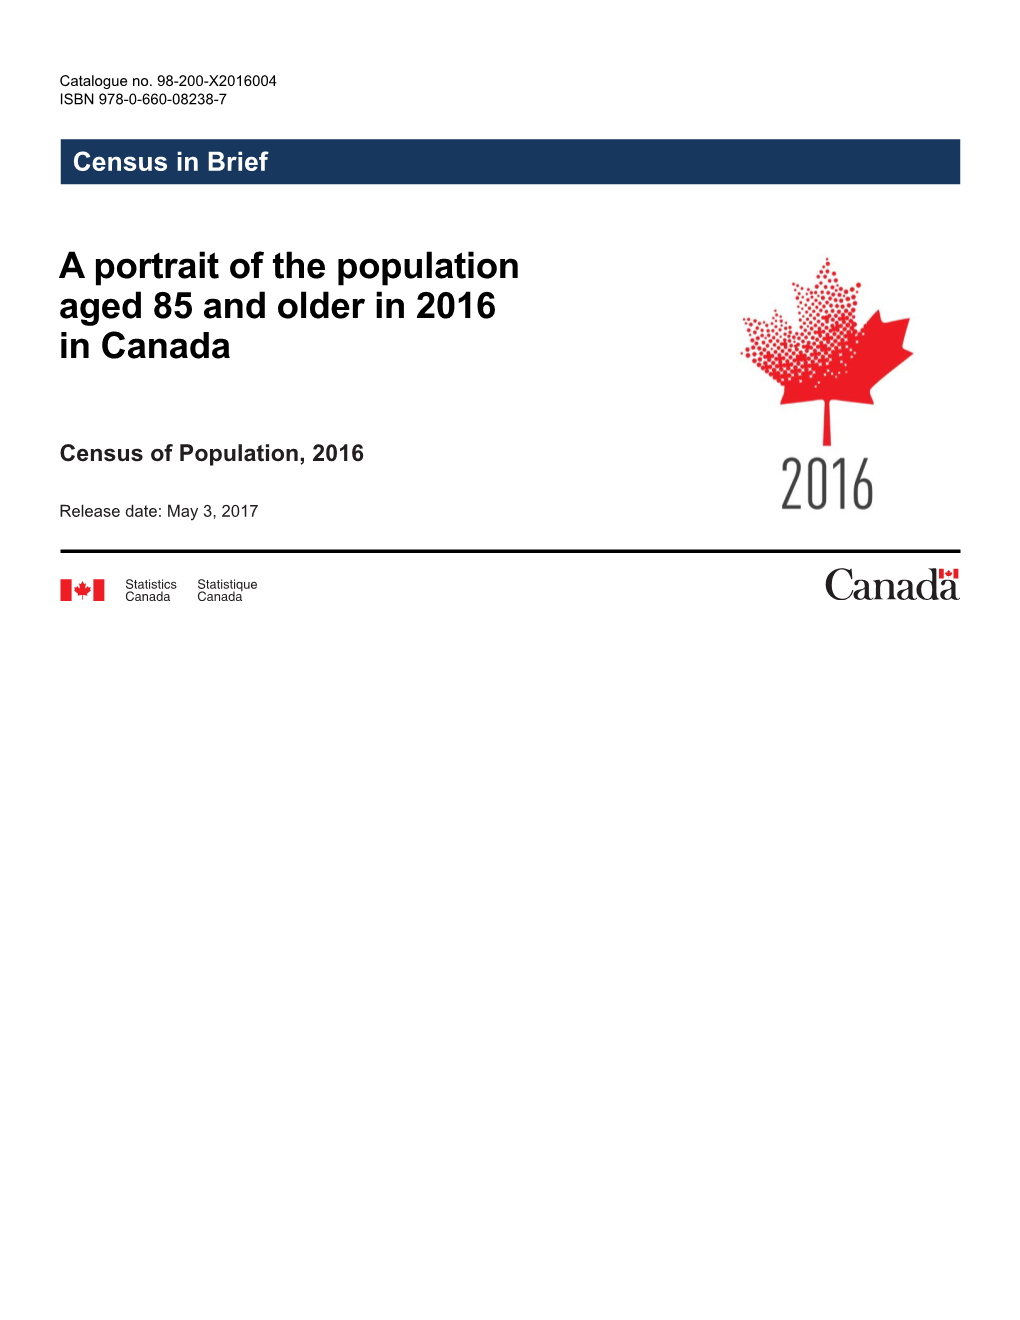 A Portrait of the Population Aged 85 and Older in 2016 in Canada